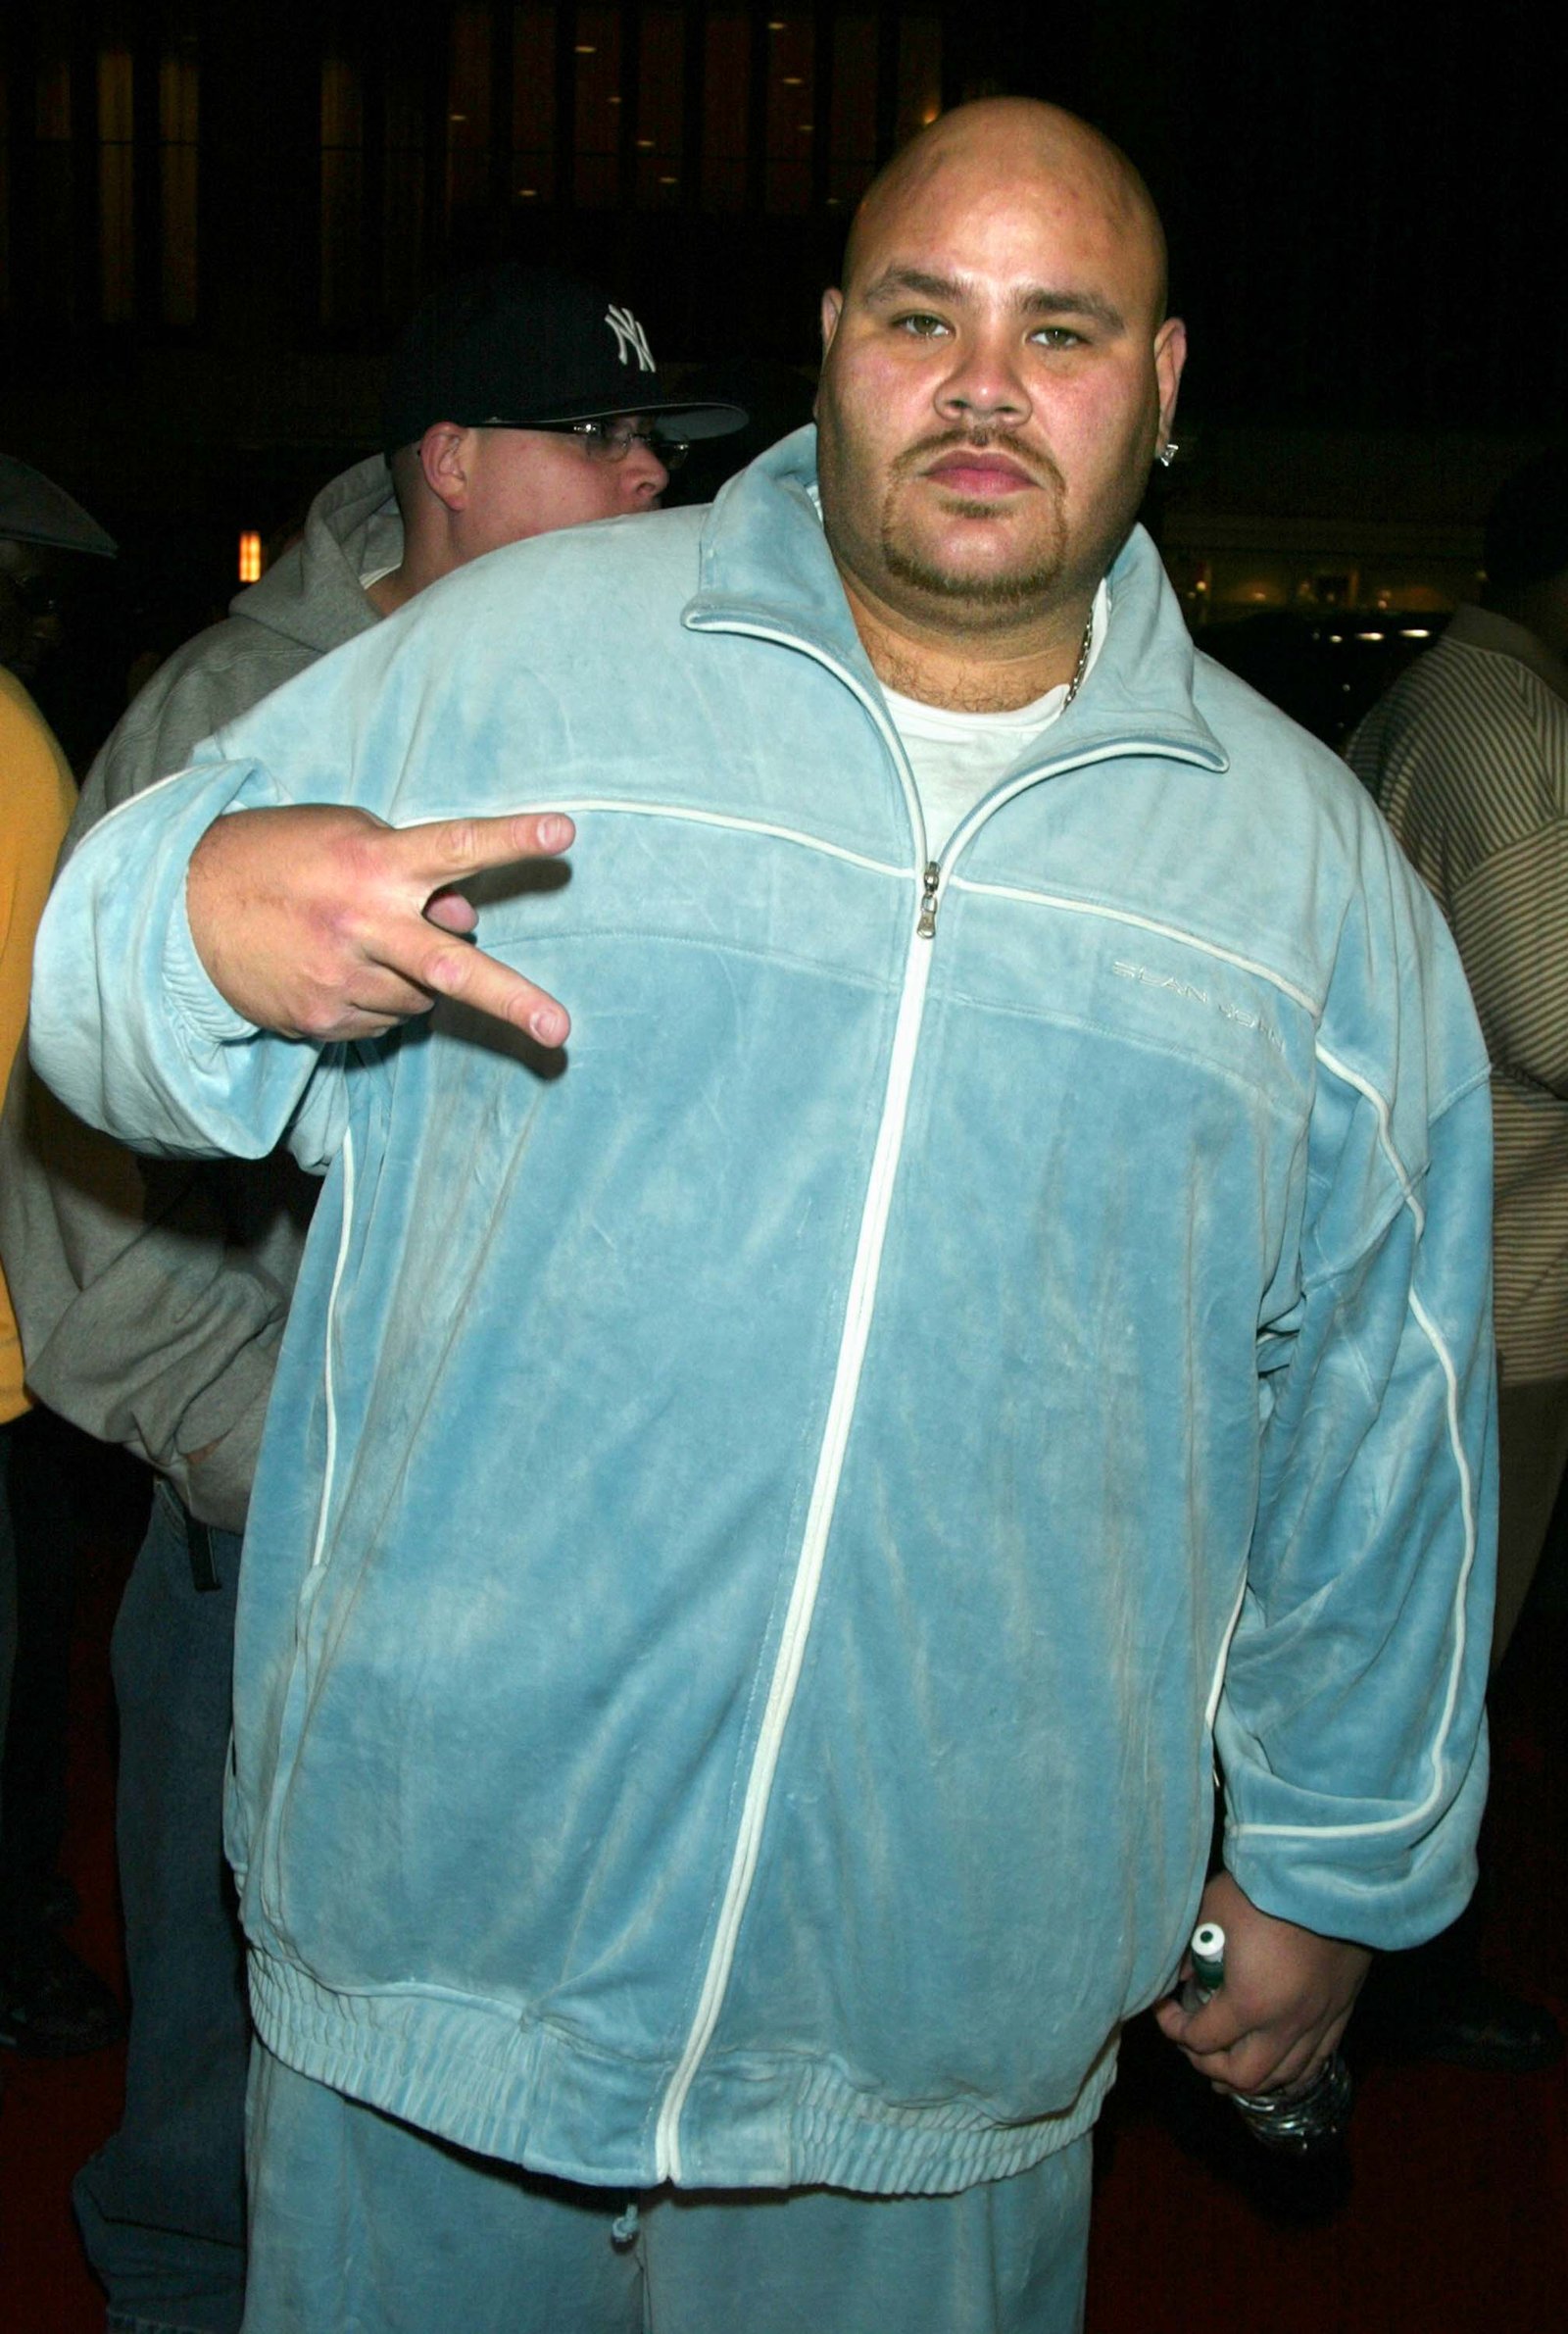 The rapper, pictured in 2002, said he weighed his heaviest at 470 pounds.